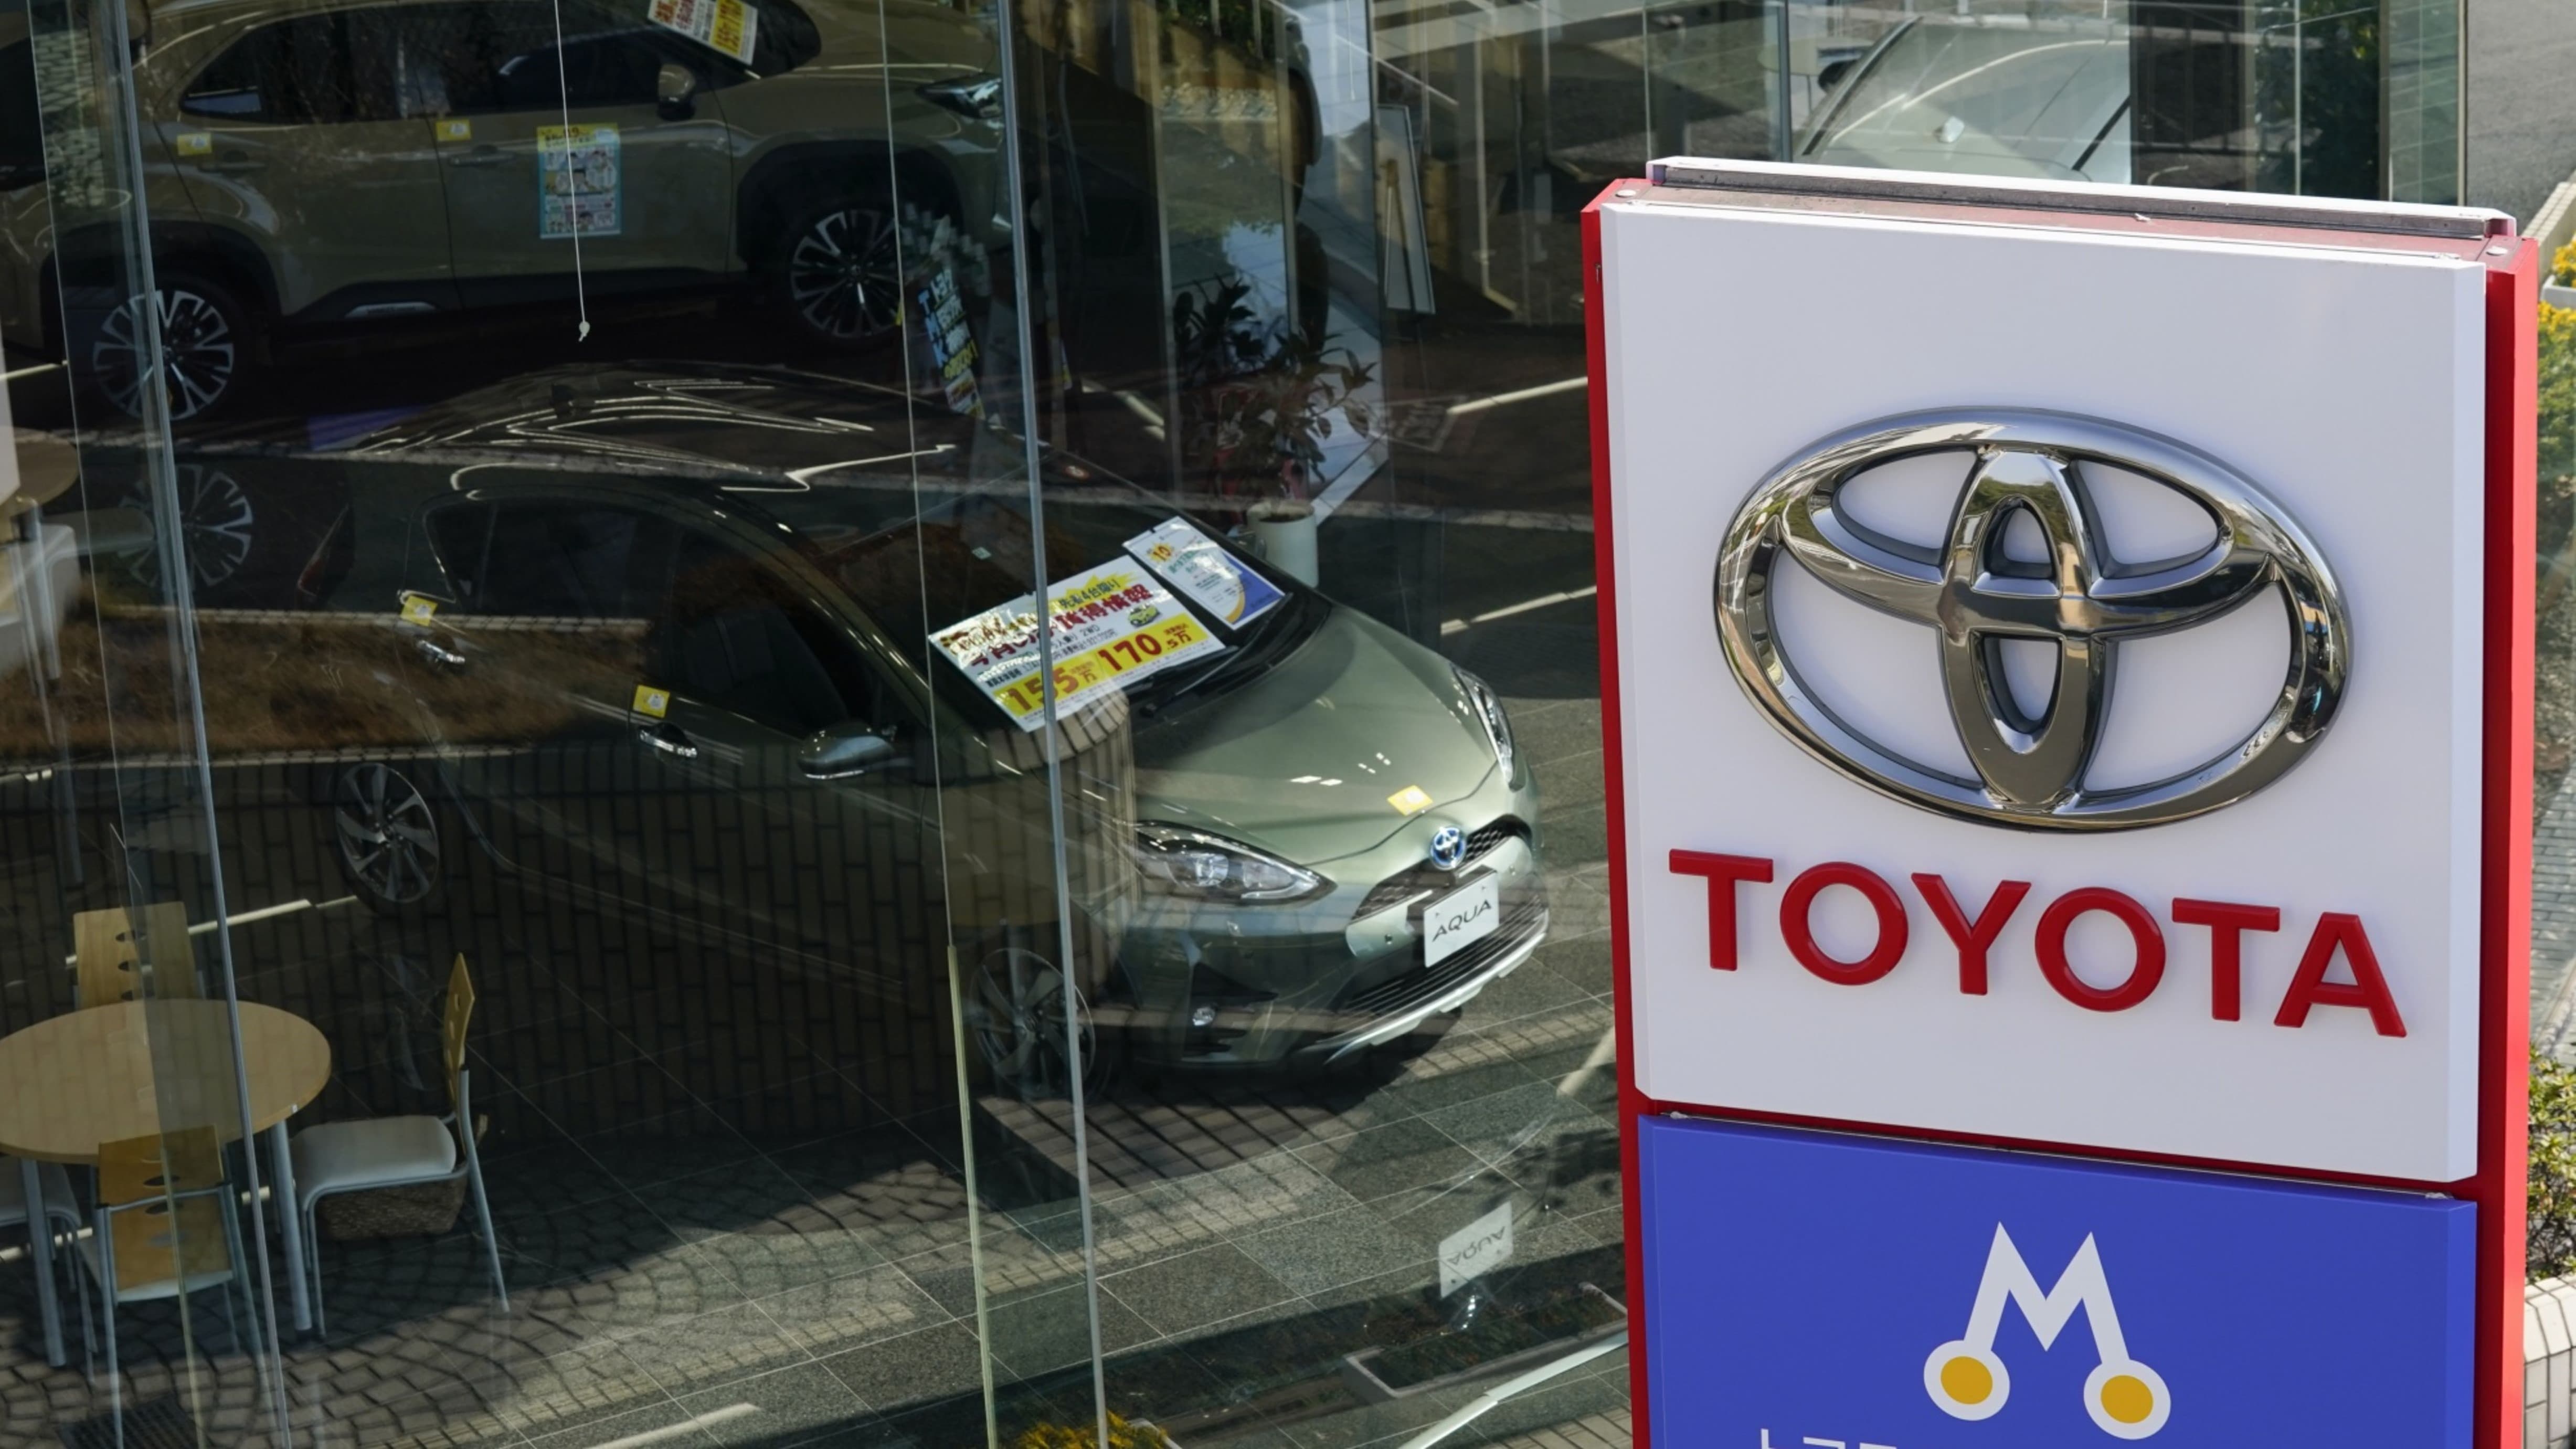 Response to Climate Change Policy Why Toyota's "Lowest" Rating Ask the Co-Founder of a Rating British Research Institute | Latest Weekly Toyo Keizai | Toyo Keizai Online thumbnail